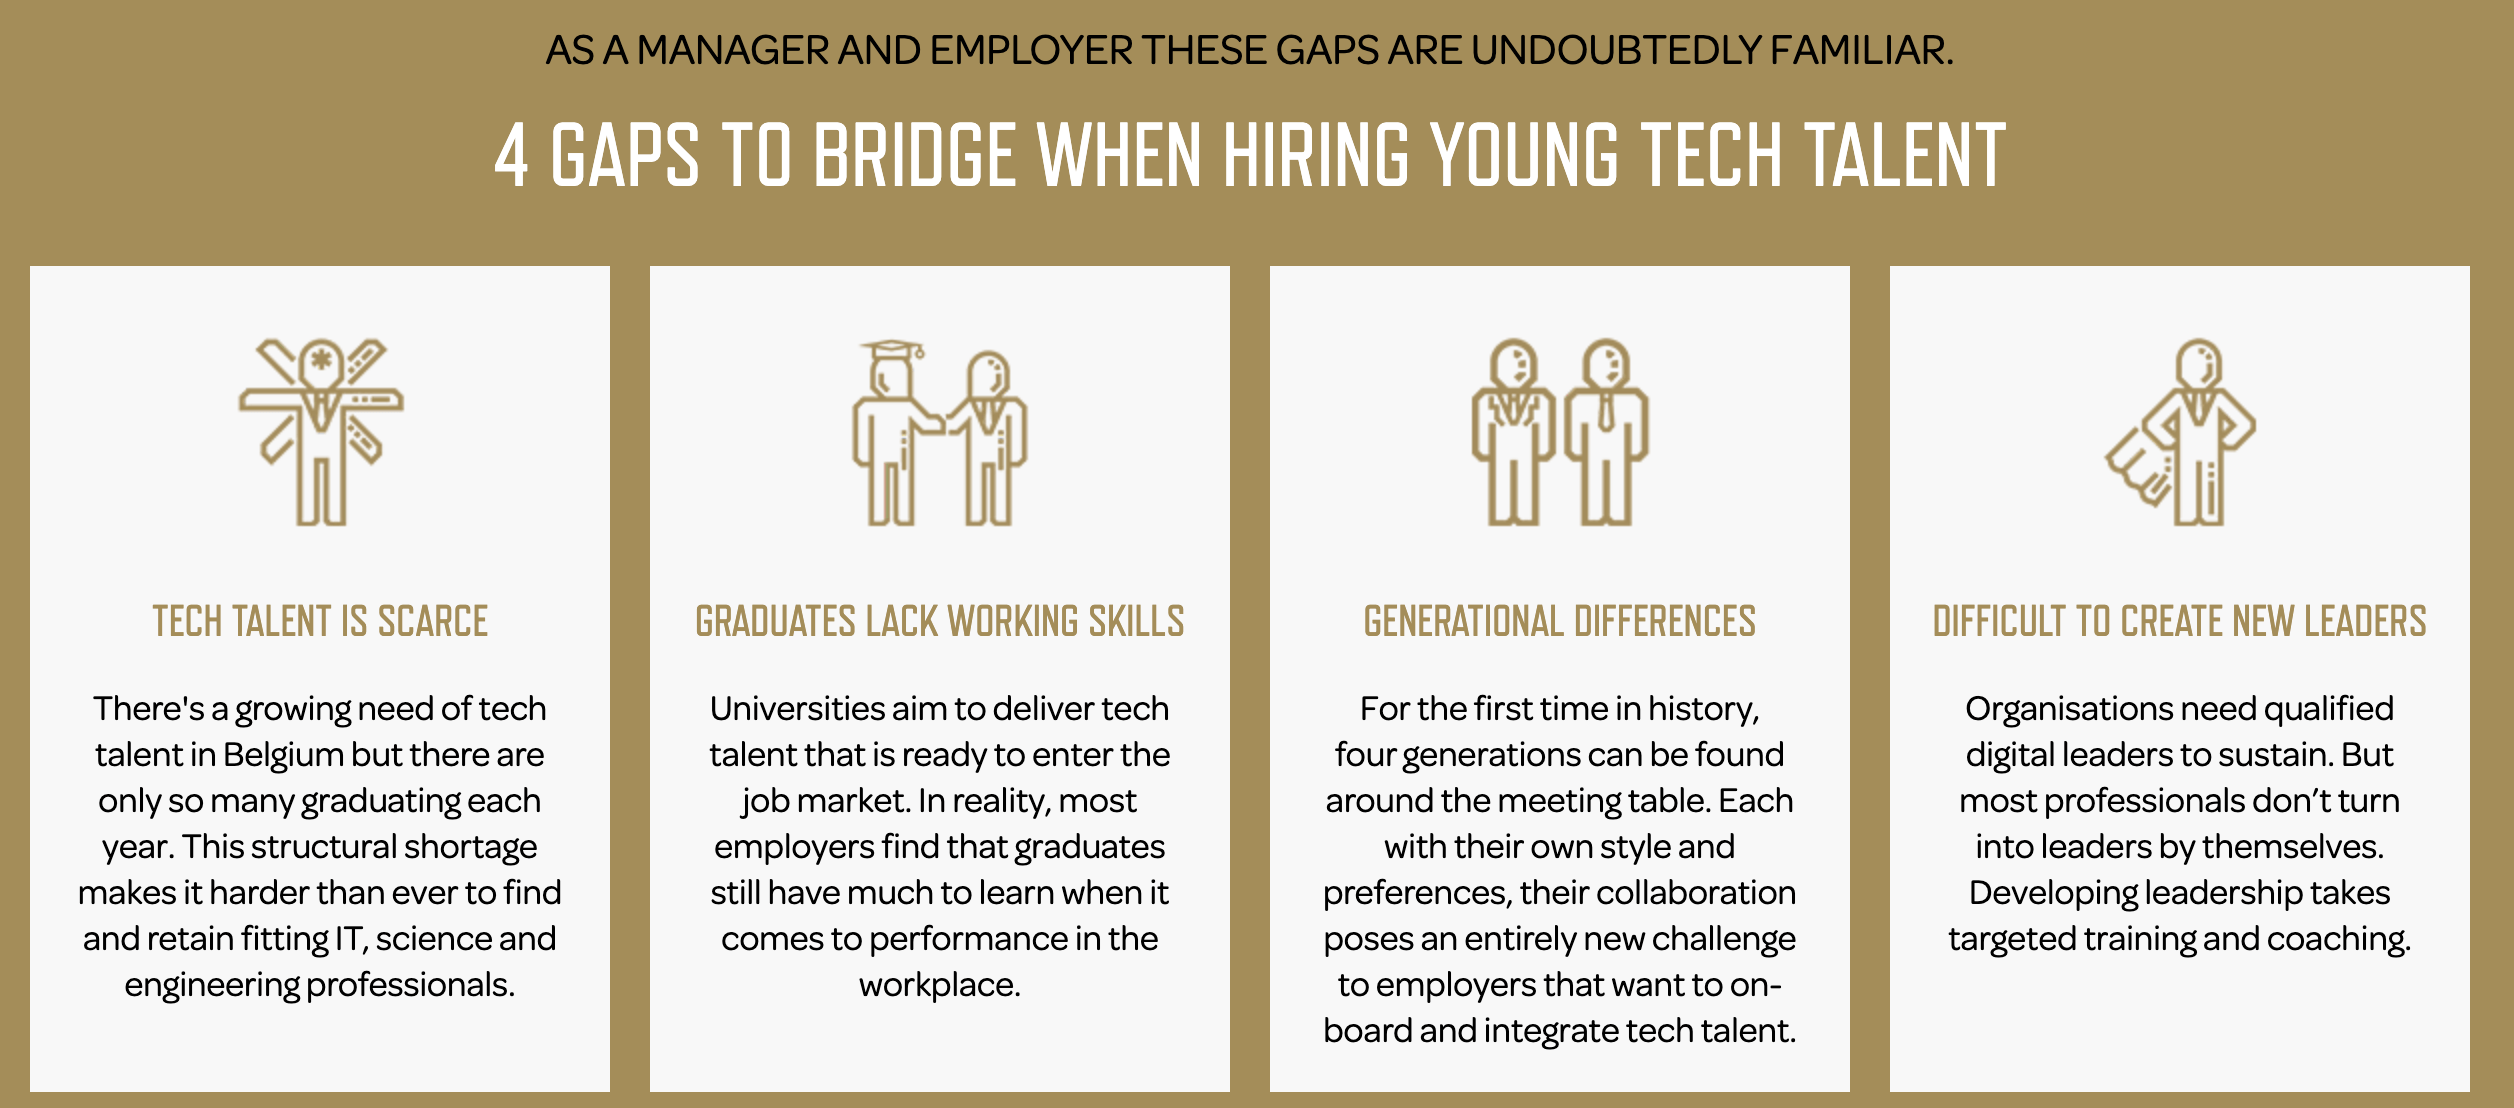 bridging the gap between generations in the workplace